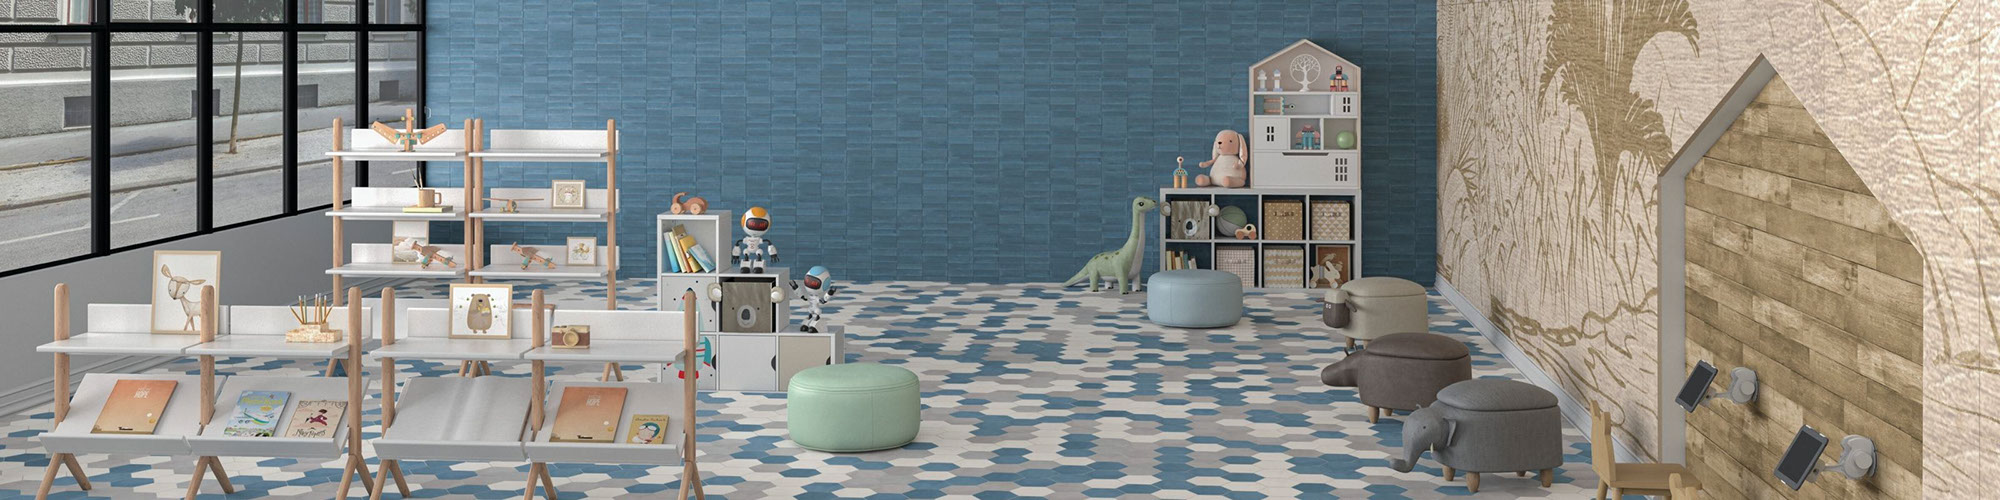 Children’s playroom with blue, white, and gray hexagon floor tile, blue wall tile, mural, bookshelves, dollhouse, and child-size ottomans.